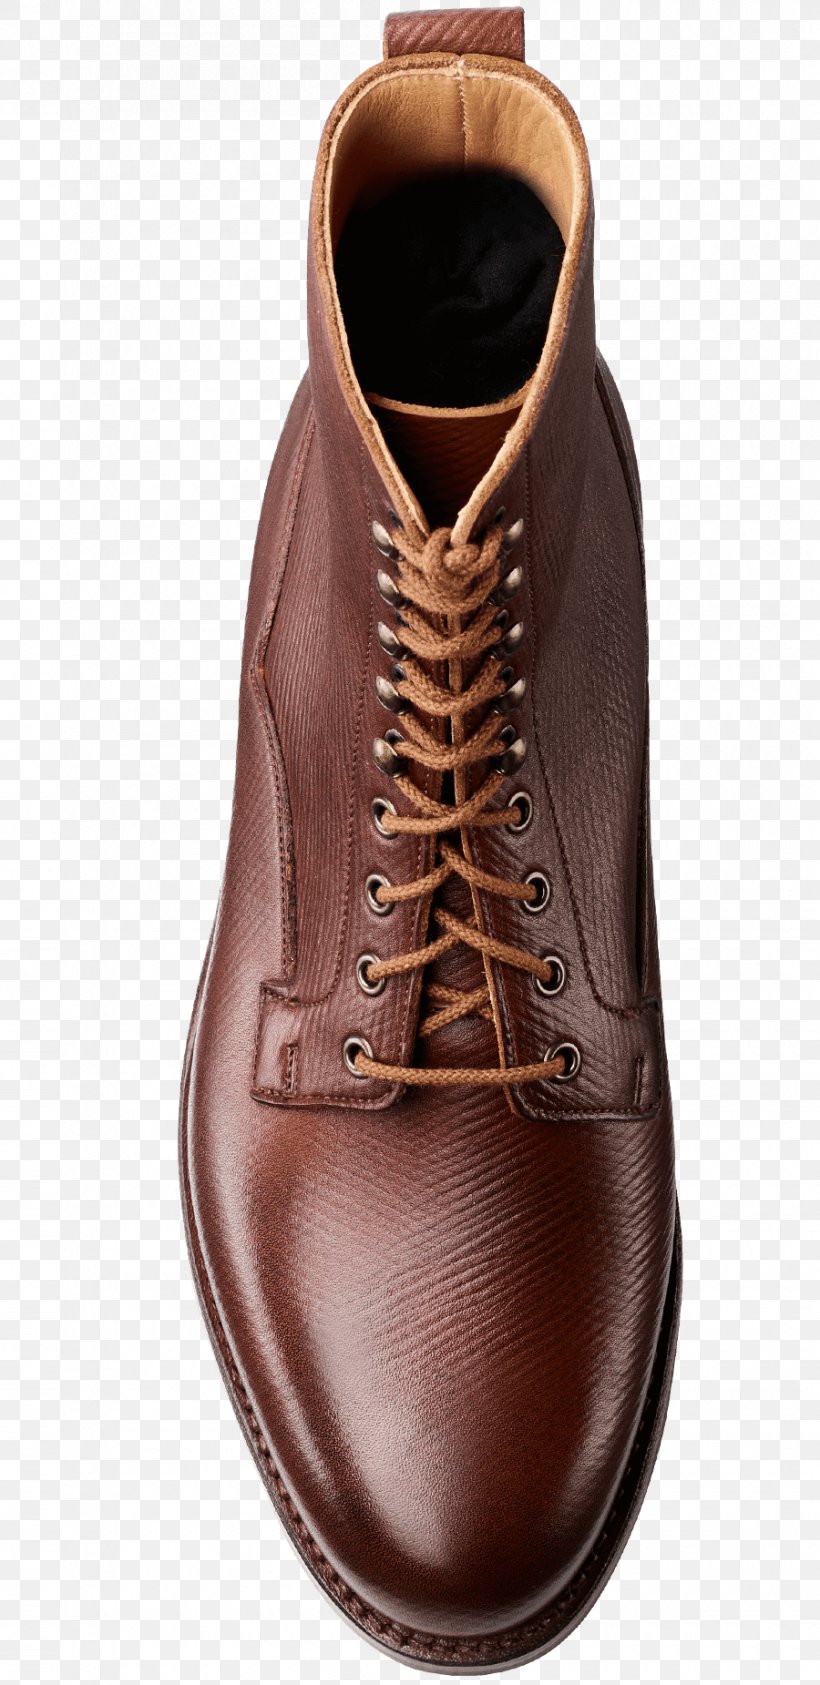 Leather Boot Shoe Walking, PNG, 900x1850px, Leather, Boot, Brown, Footwear, Shoe Download Free